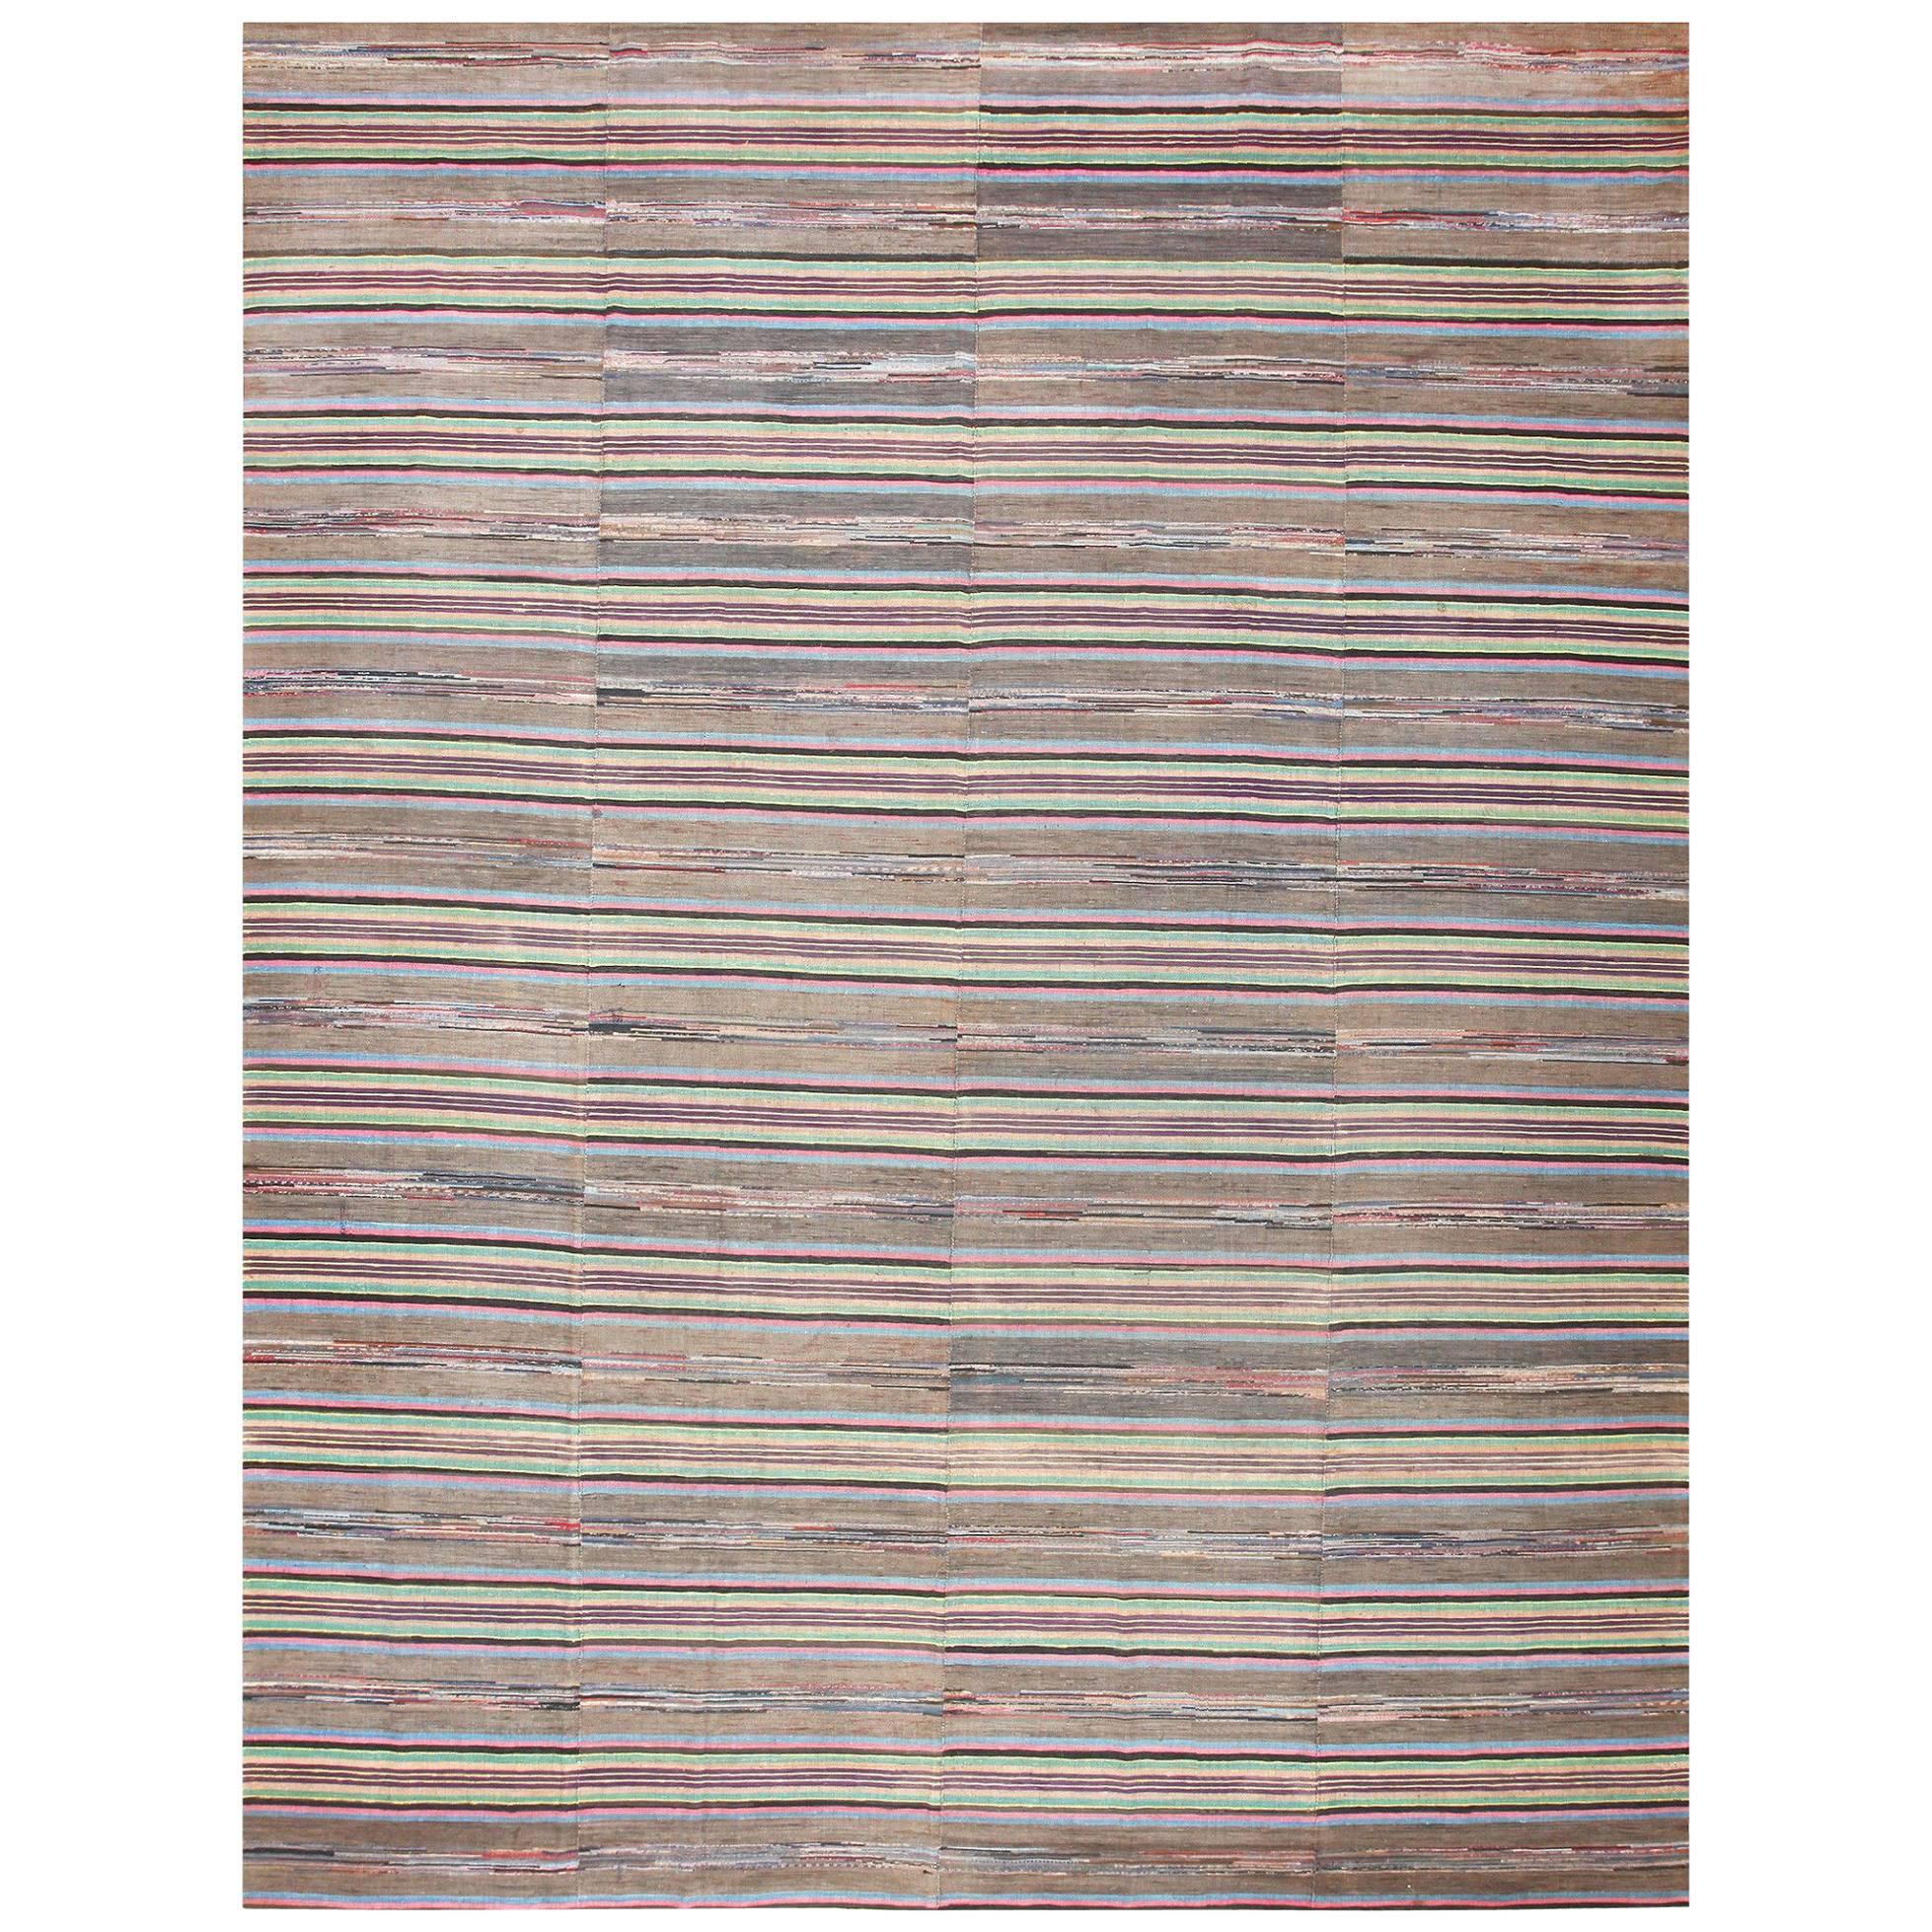 Large Room Size Antique American Rag Rug. Size: 11 ft 6 in x 14 ft 8 in 